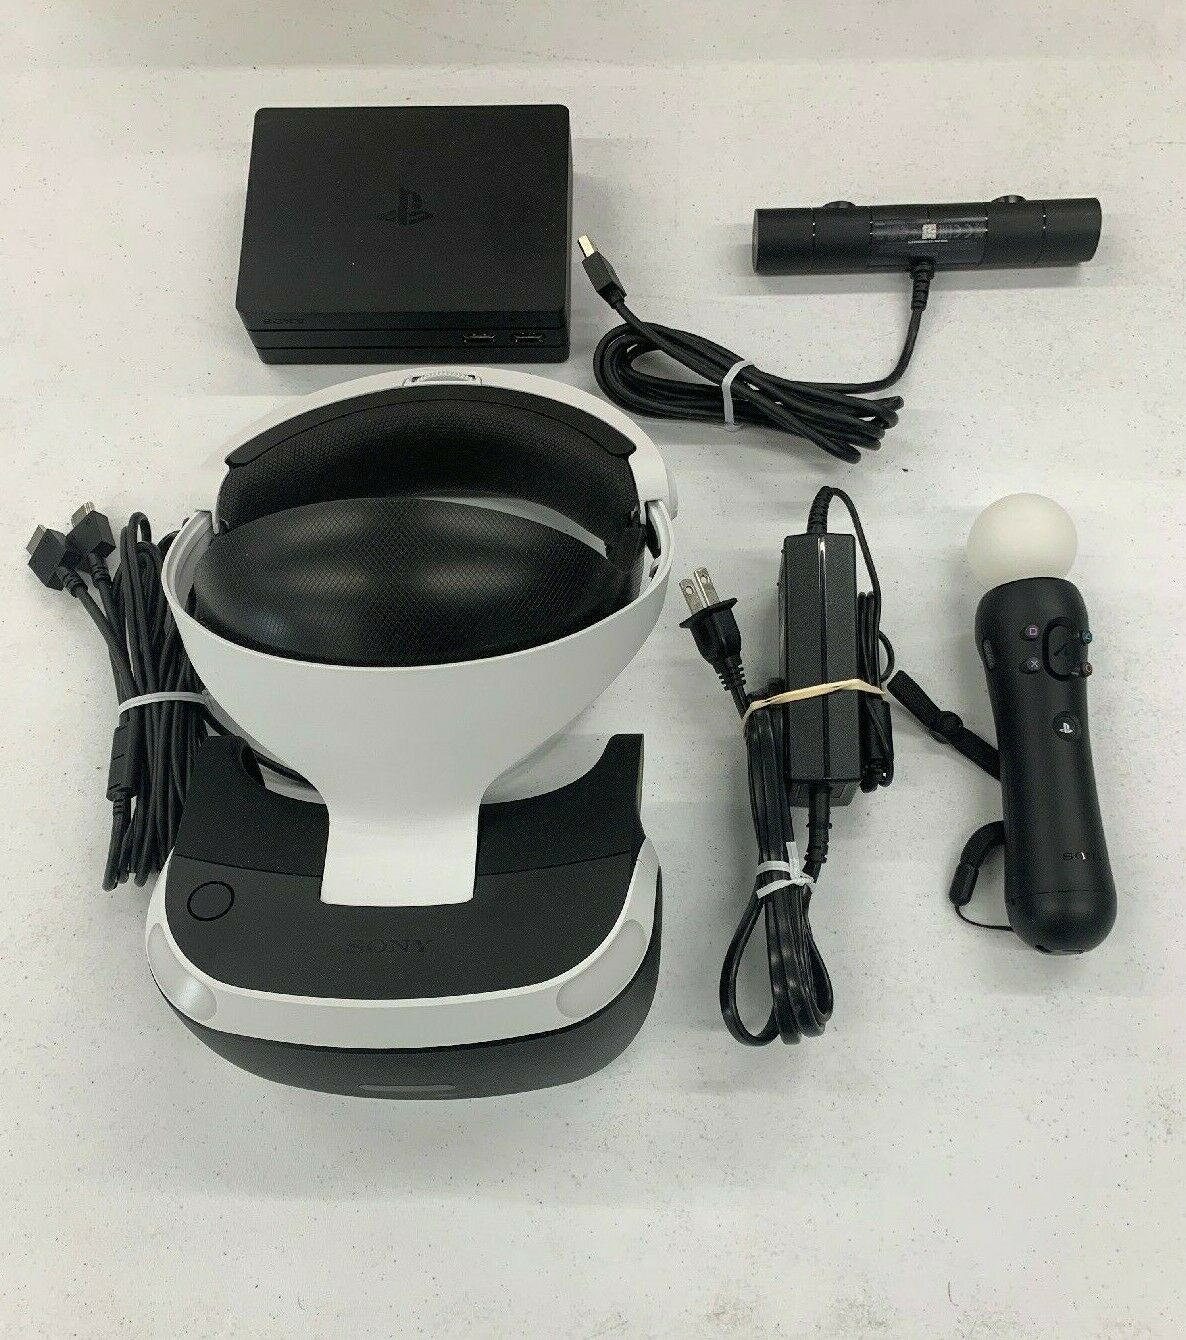 Ps4 - Psvr - Playstation Vr Replacement Components For Cuh-zvr2